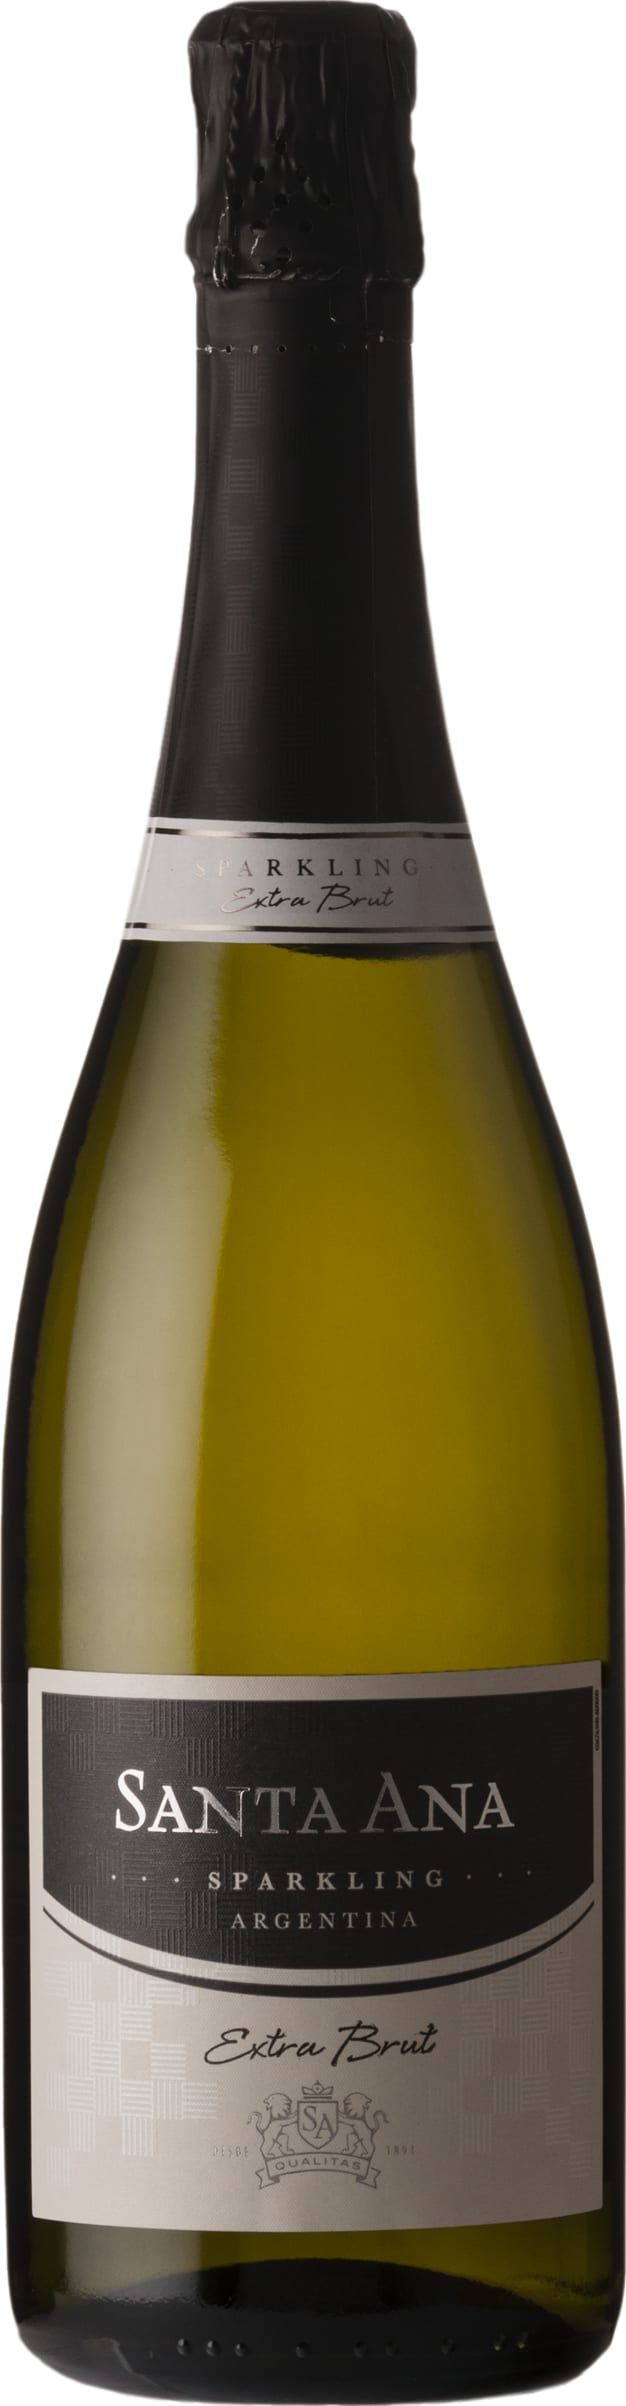 Santa Ana Sparkling Extra Brut 75cl NV - Buy Santa Ana Wines from GREAT WINES DIRECT wine shop